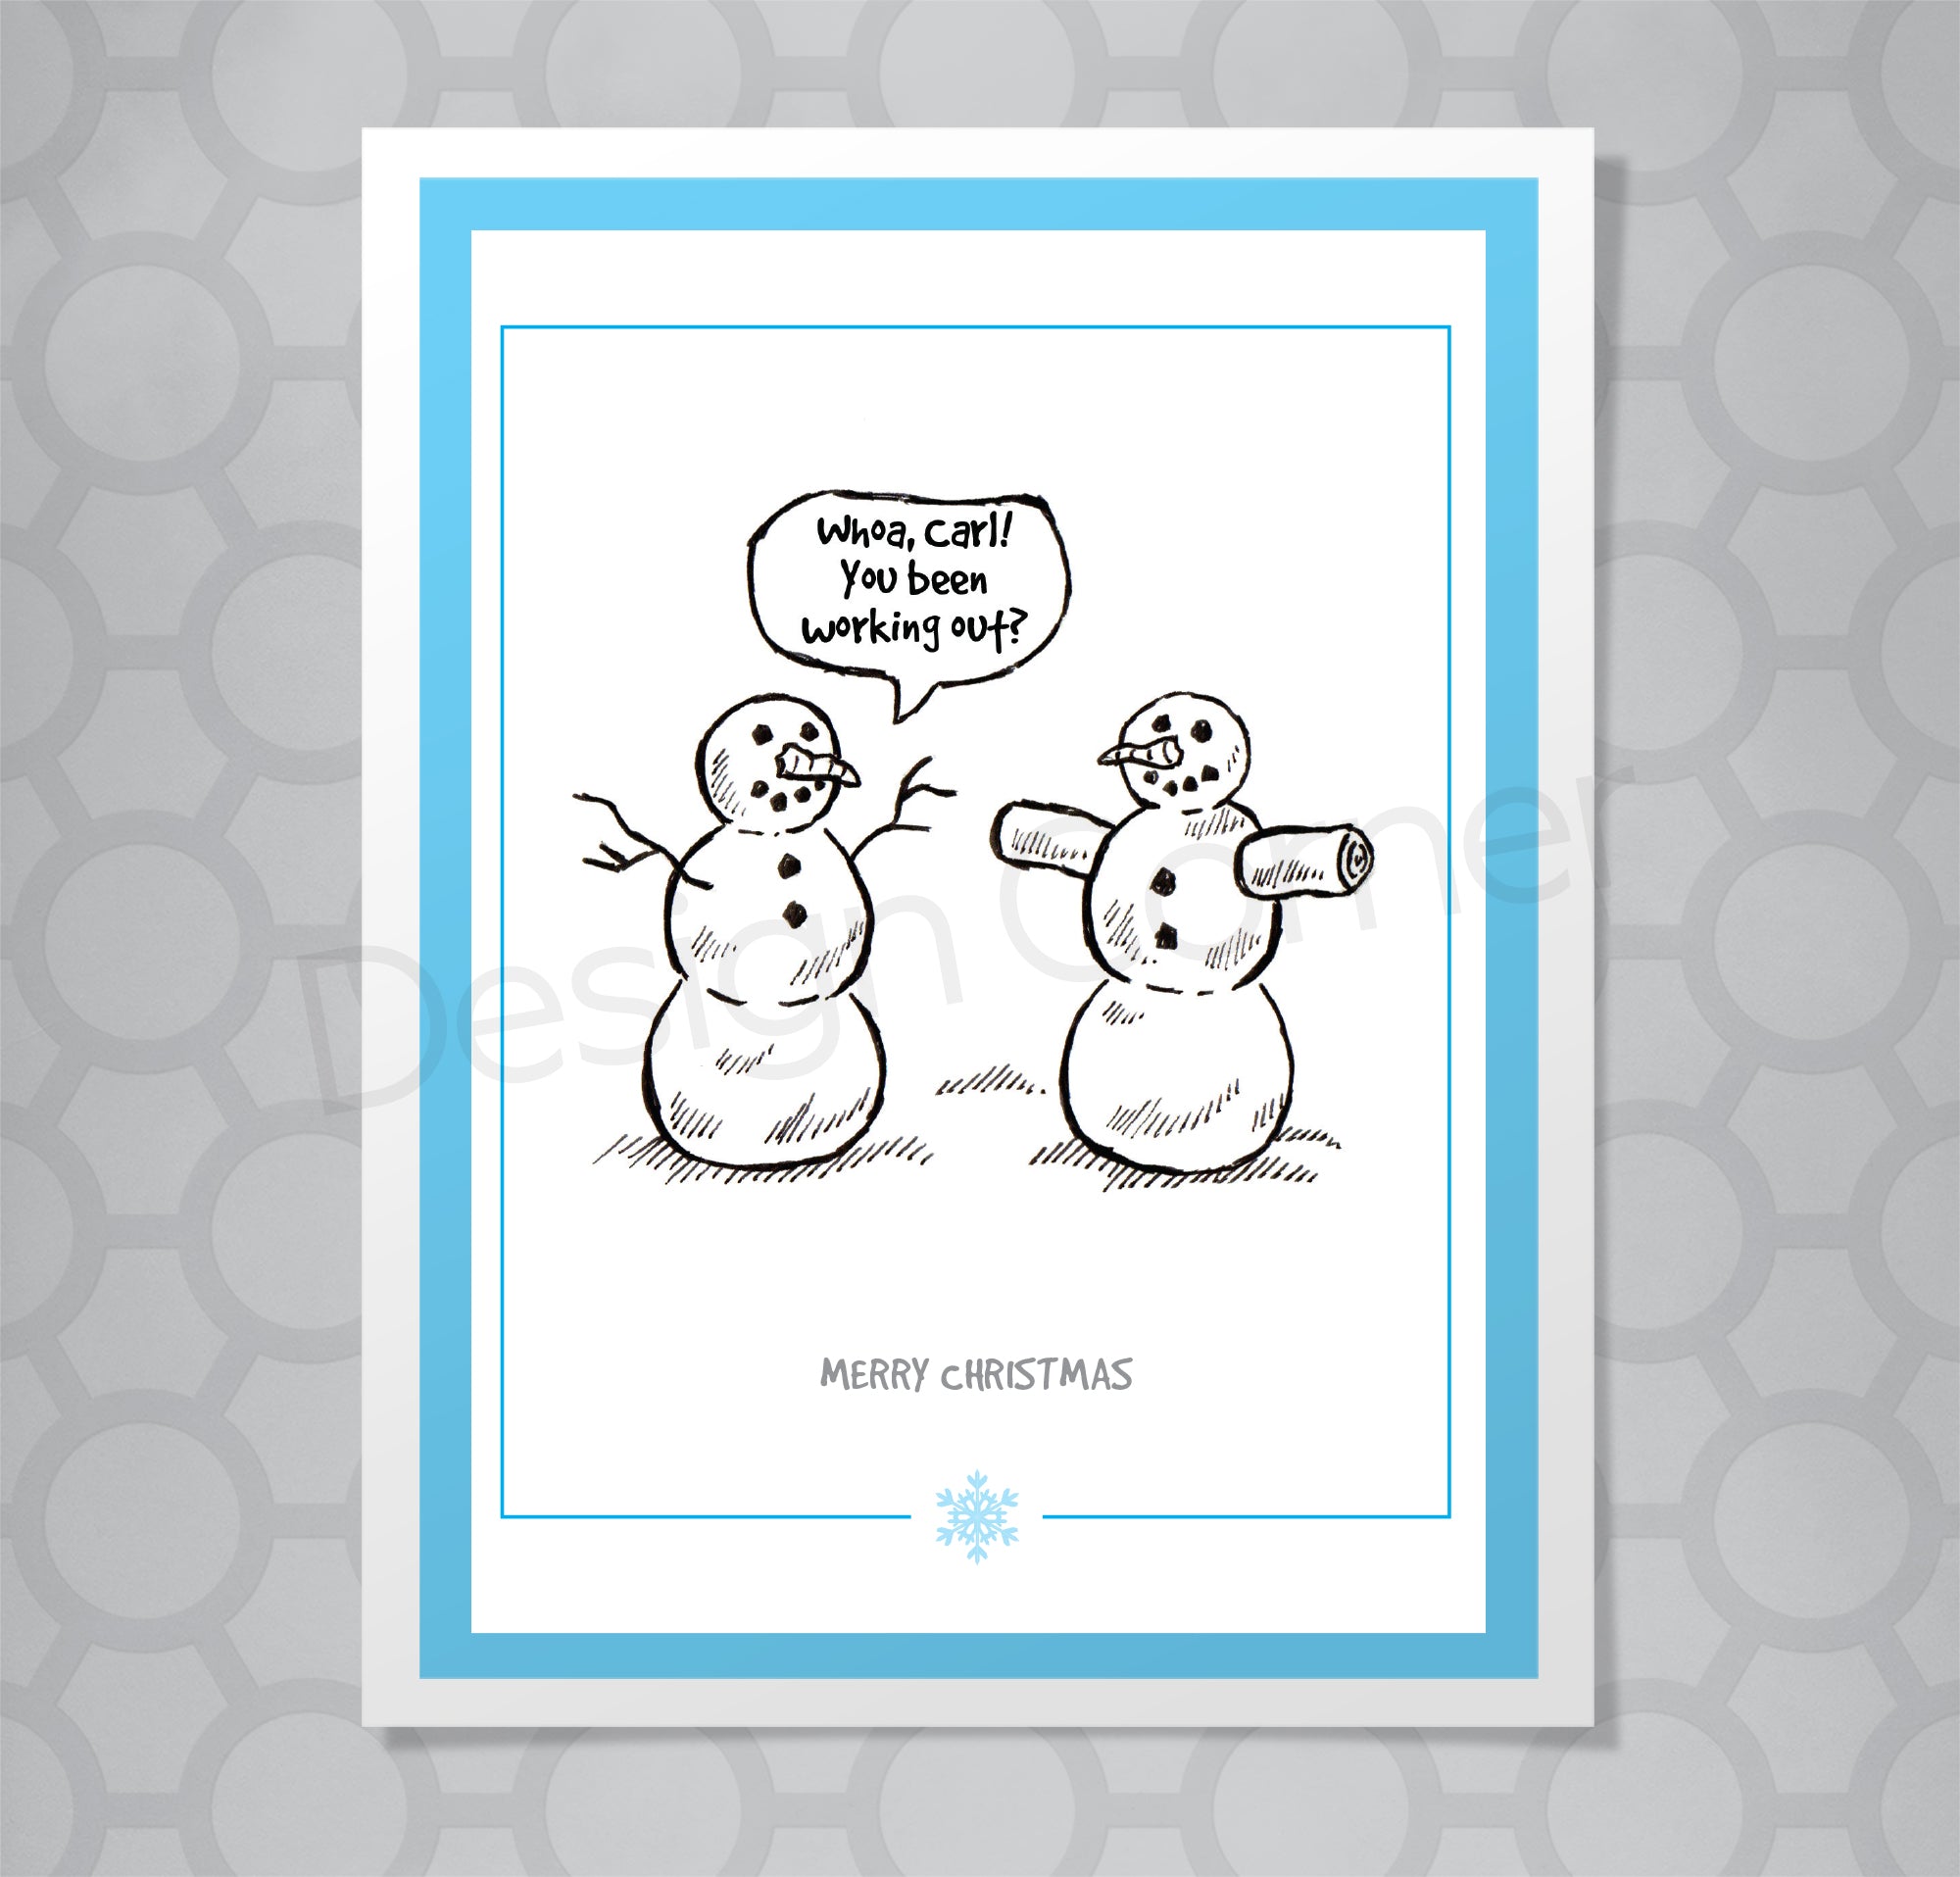 Illustration of two snowmen on a Christmas card. One snowman has thick logs for arms. Caption: "Whoa Carl! You been working out?"